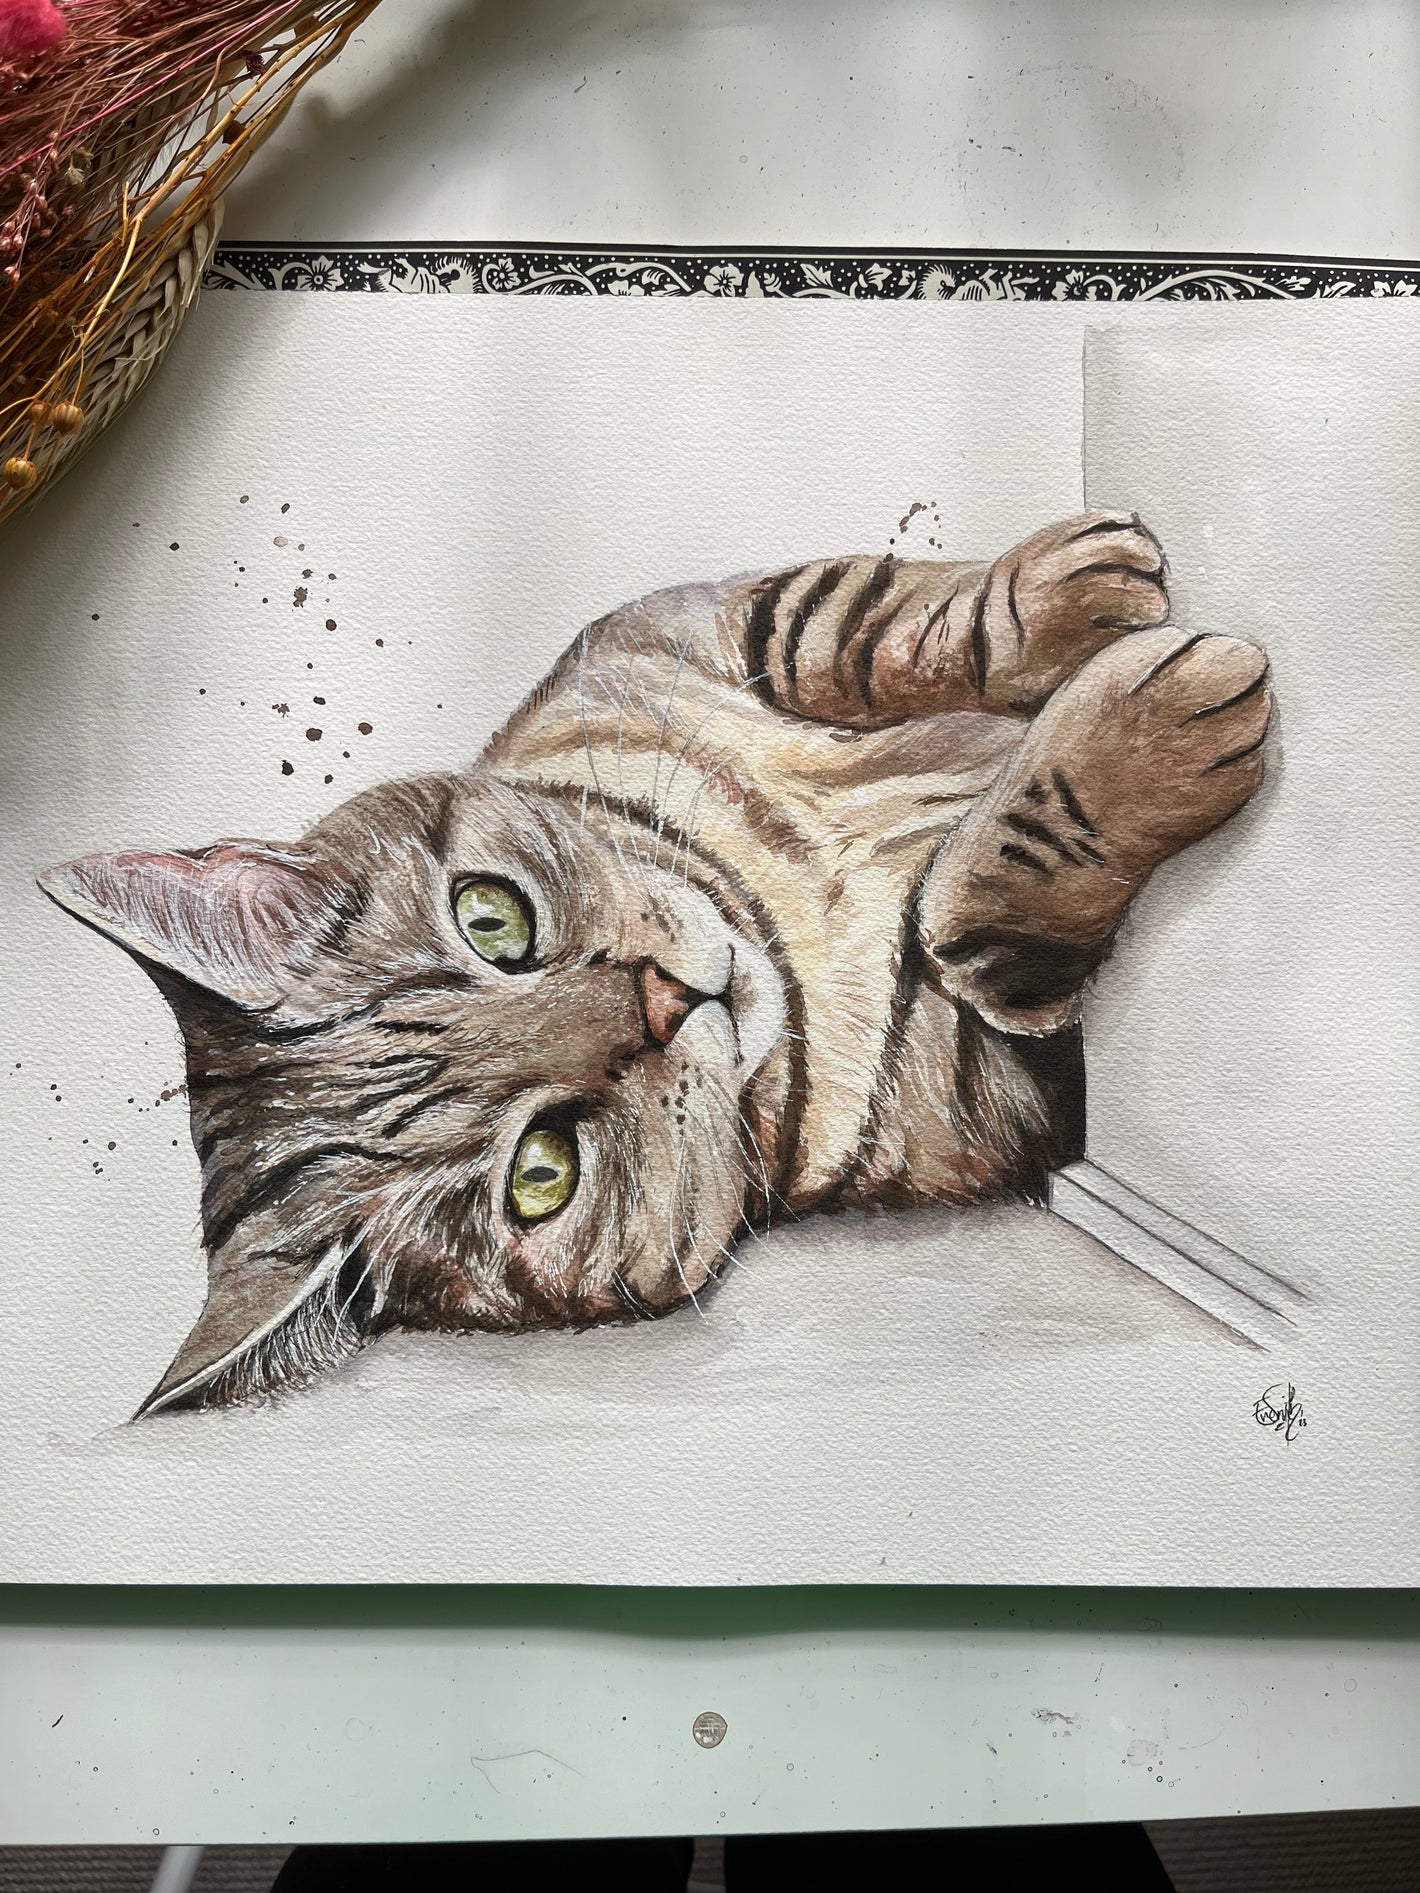 A realistic watercolour portrait of a striped cat laying playfully against a wall. Painted by Grimsby artist, Eve Leoni Smith.